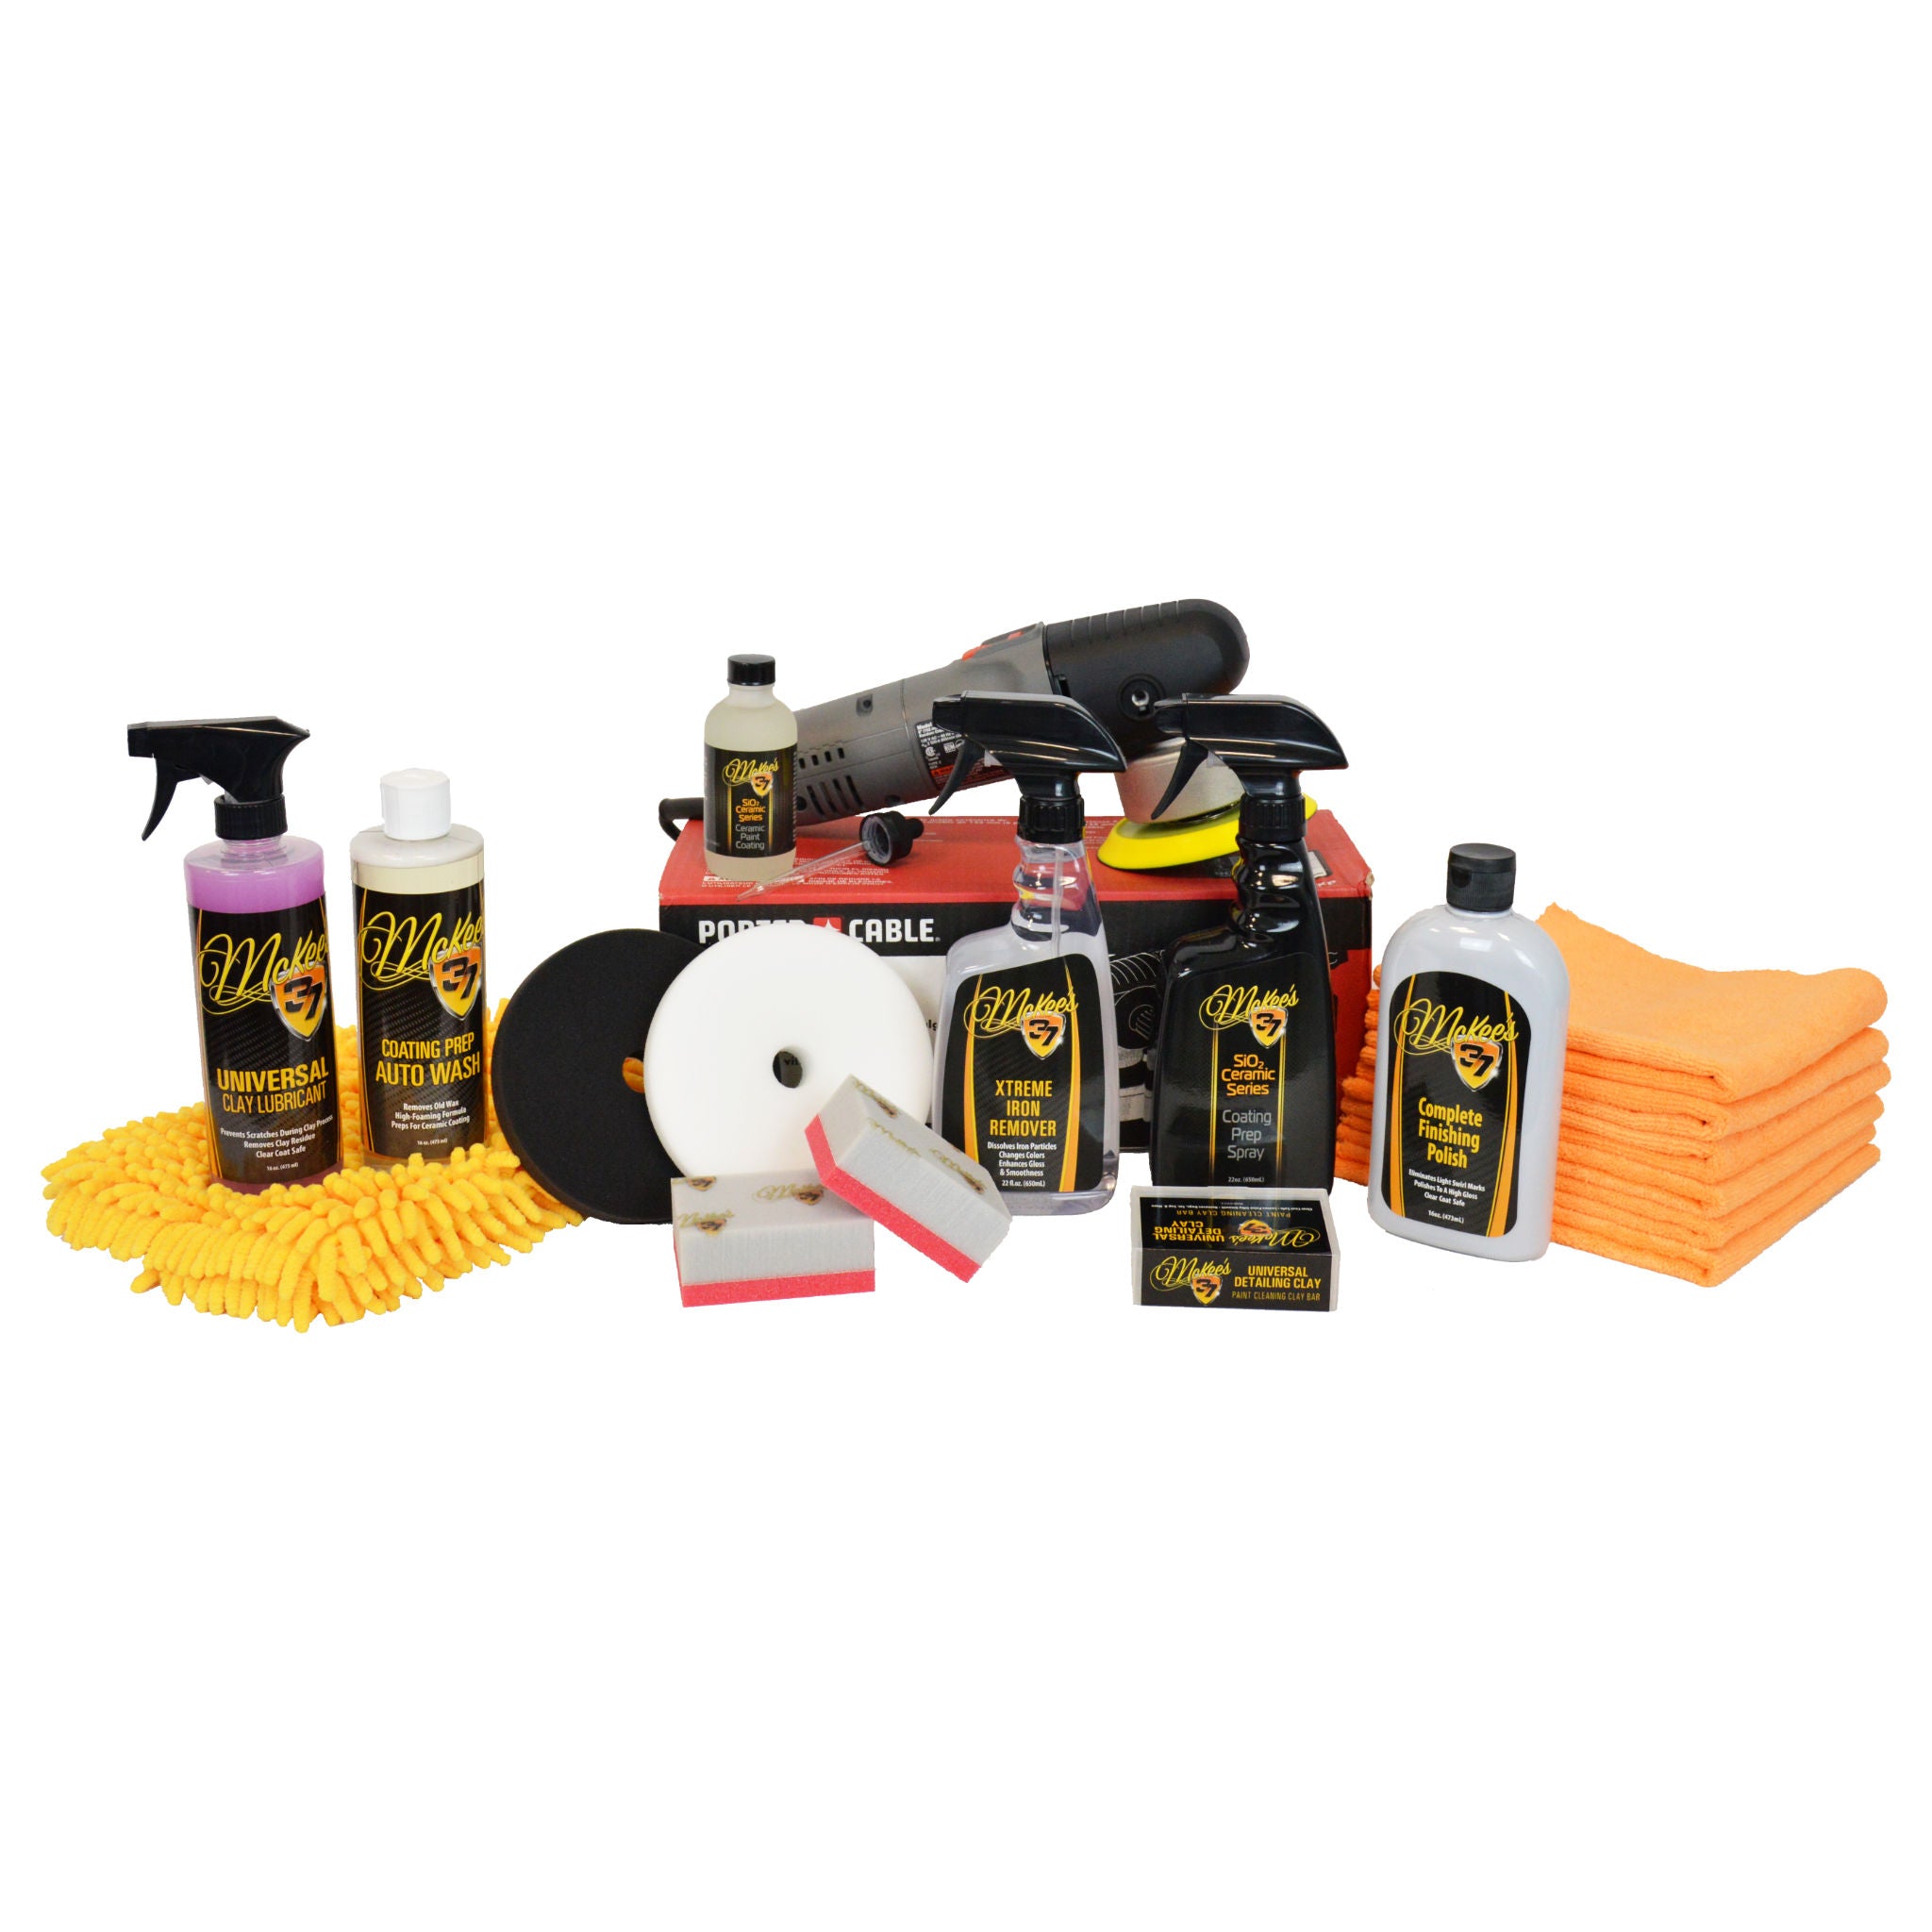 Premium Polishing Compound & Cleaner Kit Specially Formulated for EPO